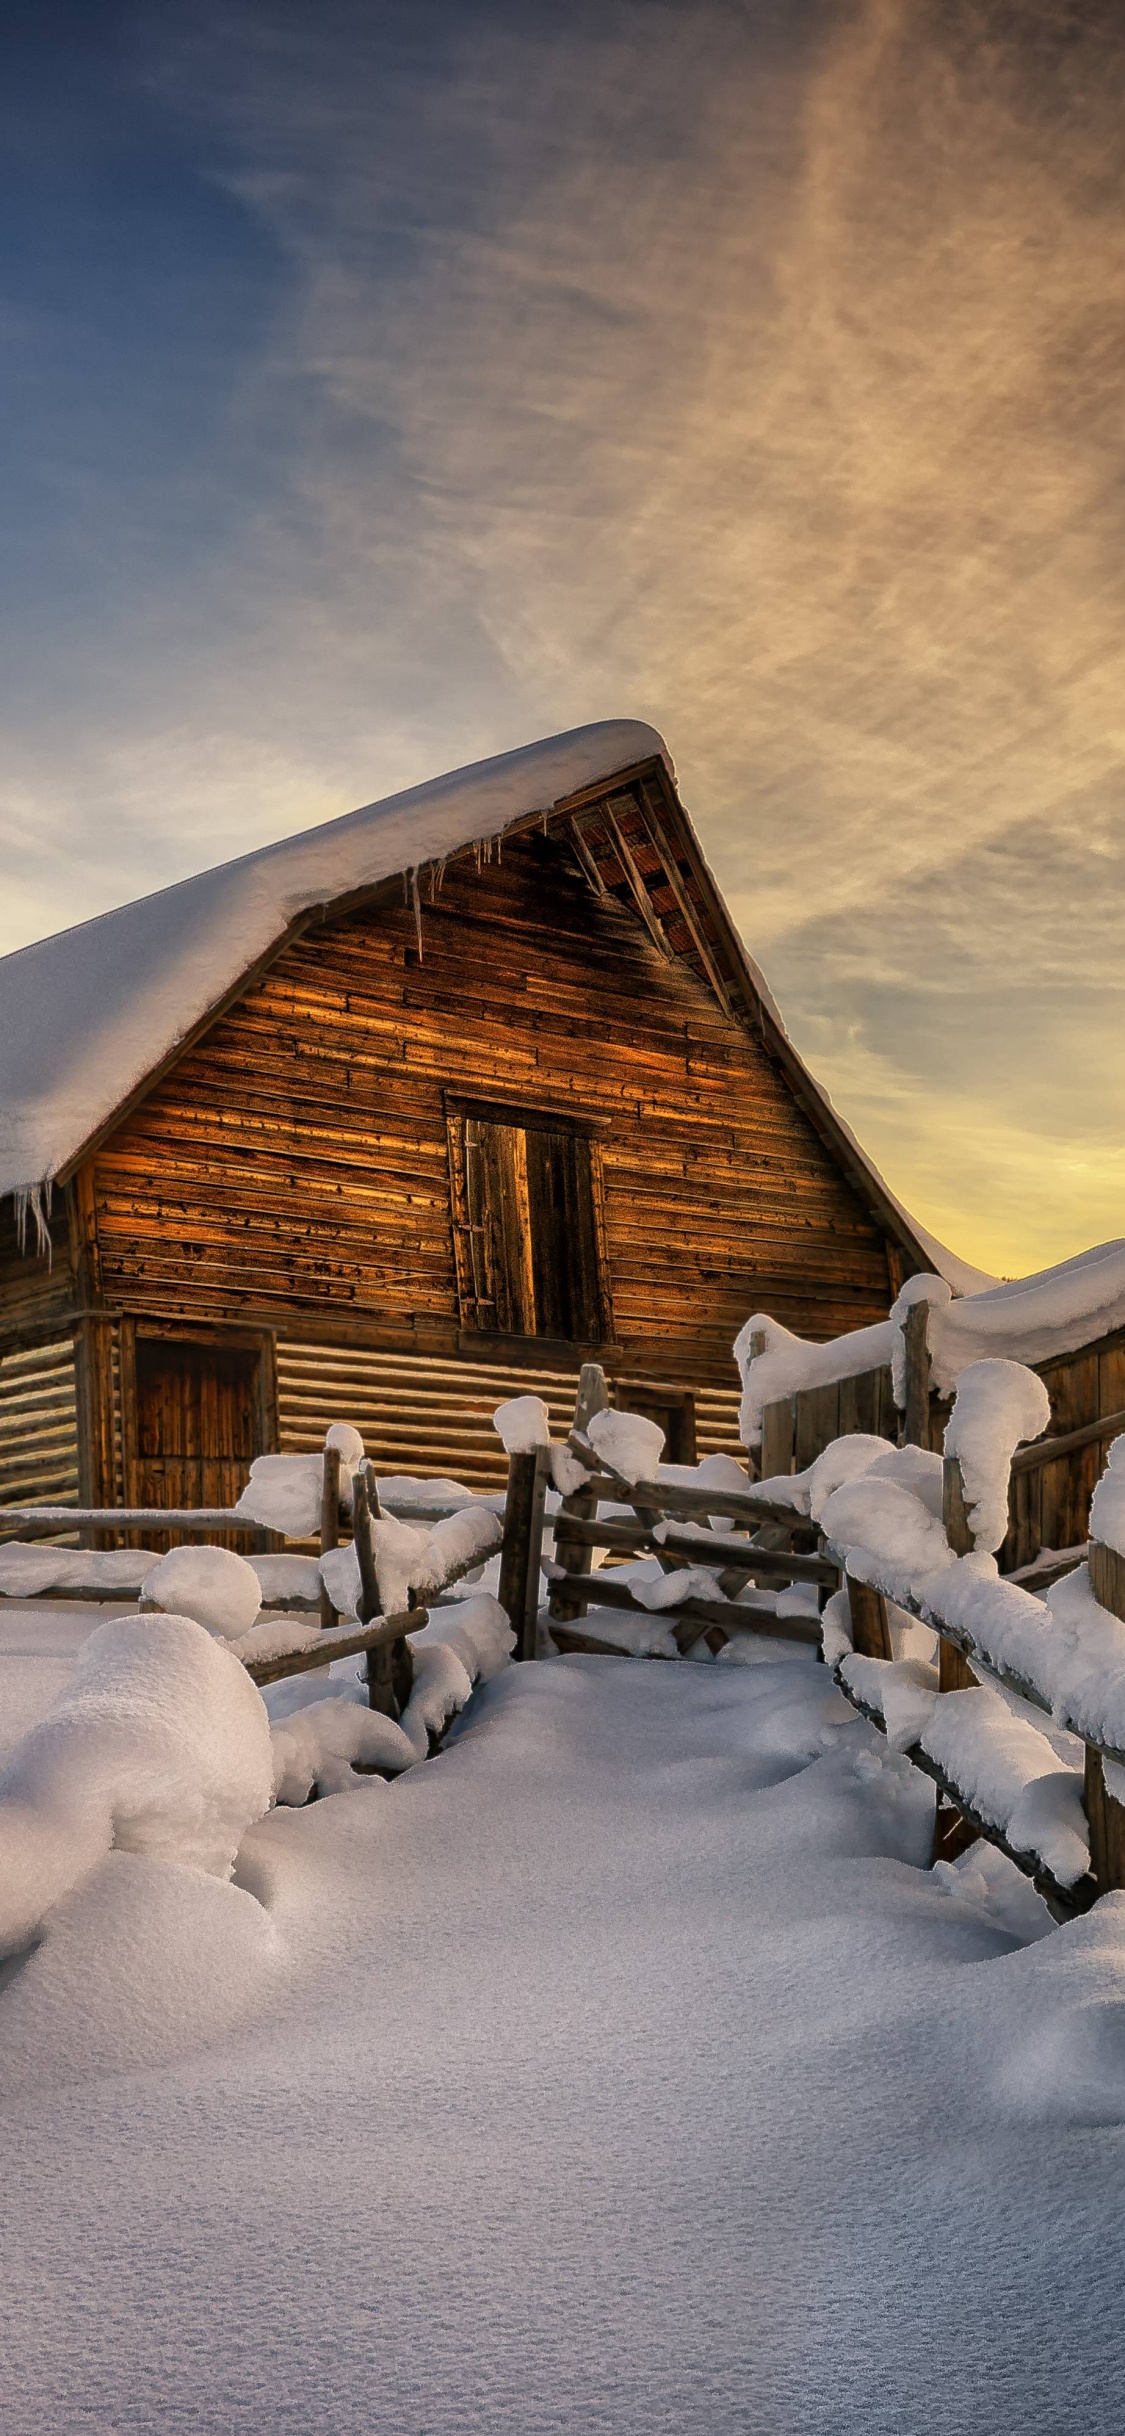 Brown Wooden House Covered by Snow Under Cloudy Sky. Wallpaper in 1125x2436 Resolution